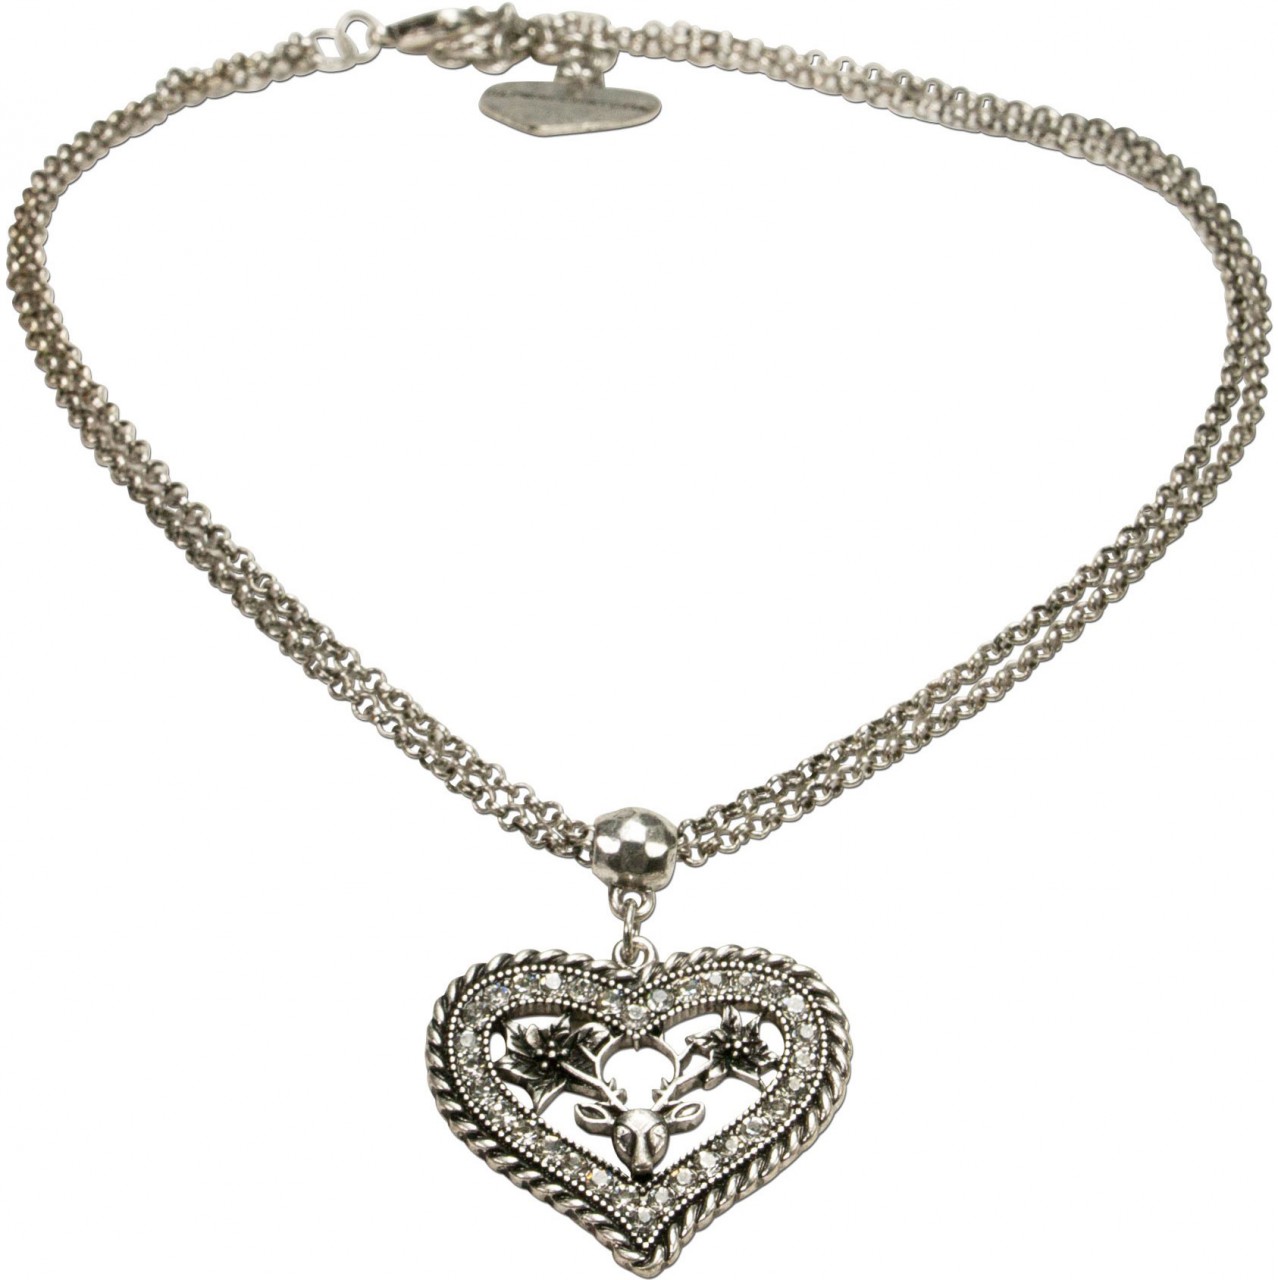 Necklace with Rhinestone Heart Pendant, Antique Silver